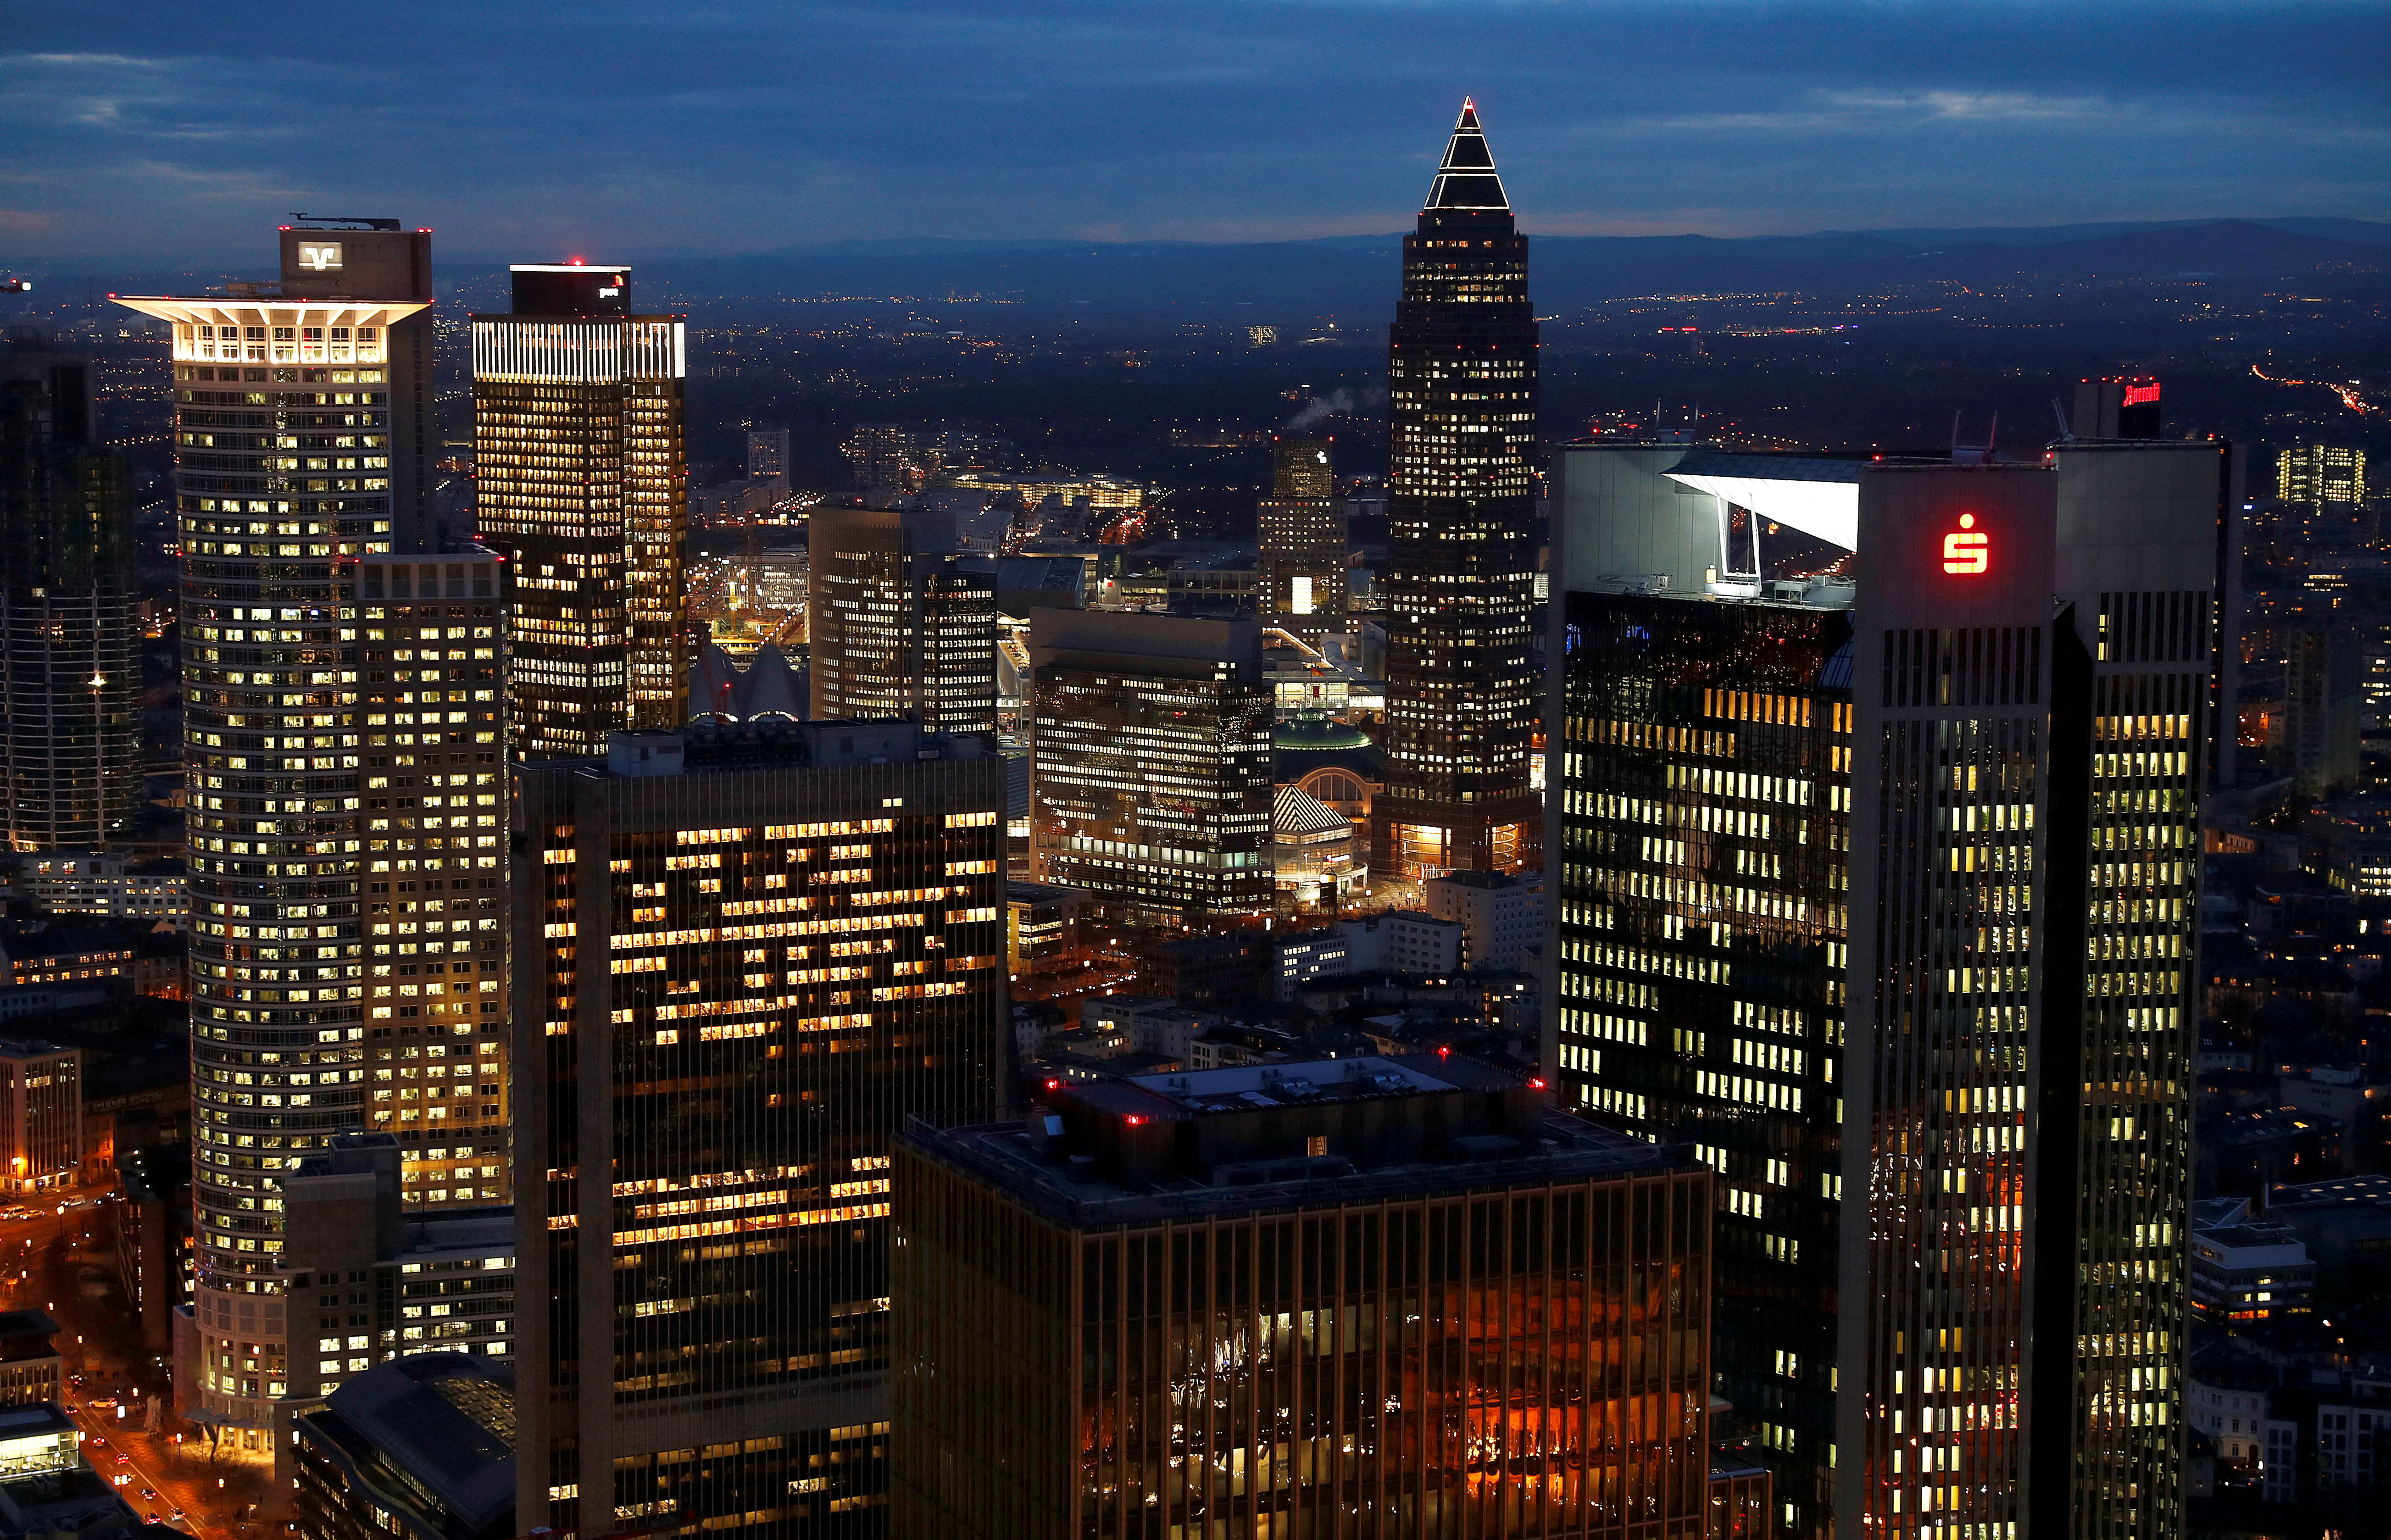 The financial district is photographed on early evening in Frankfurt